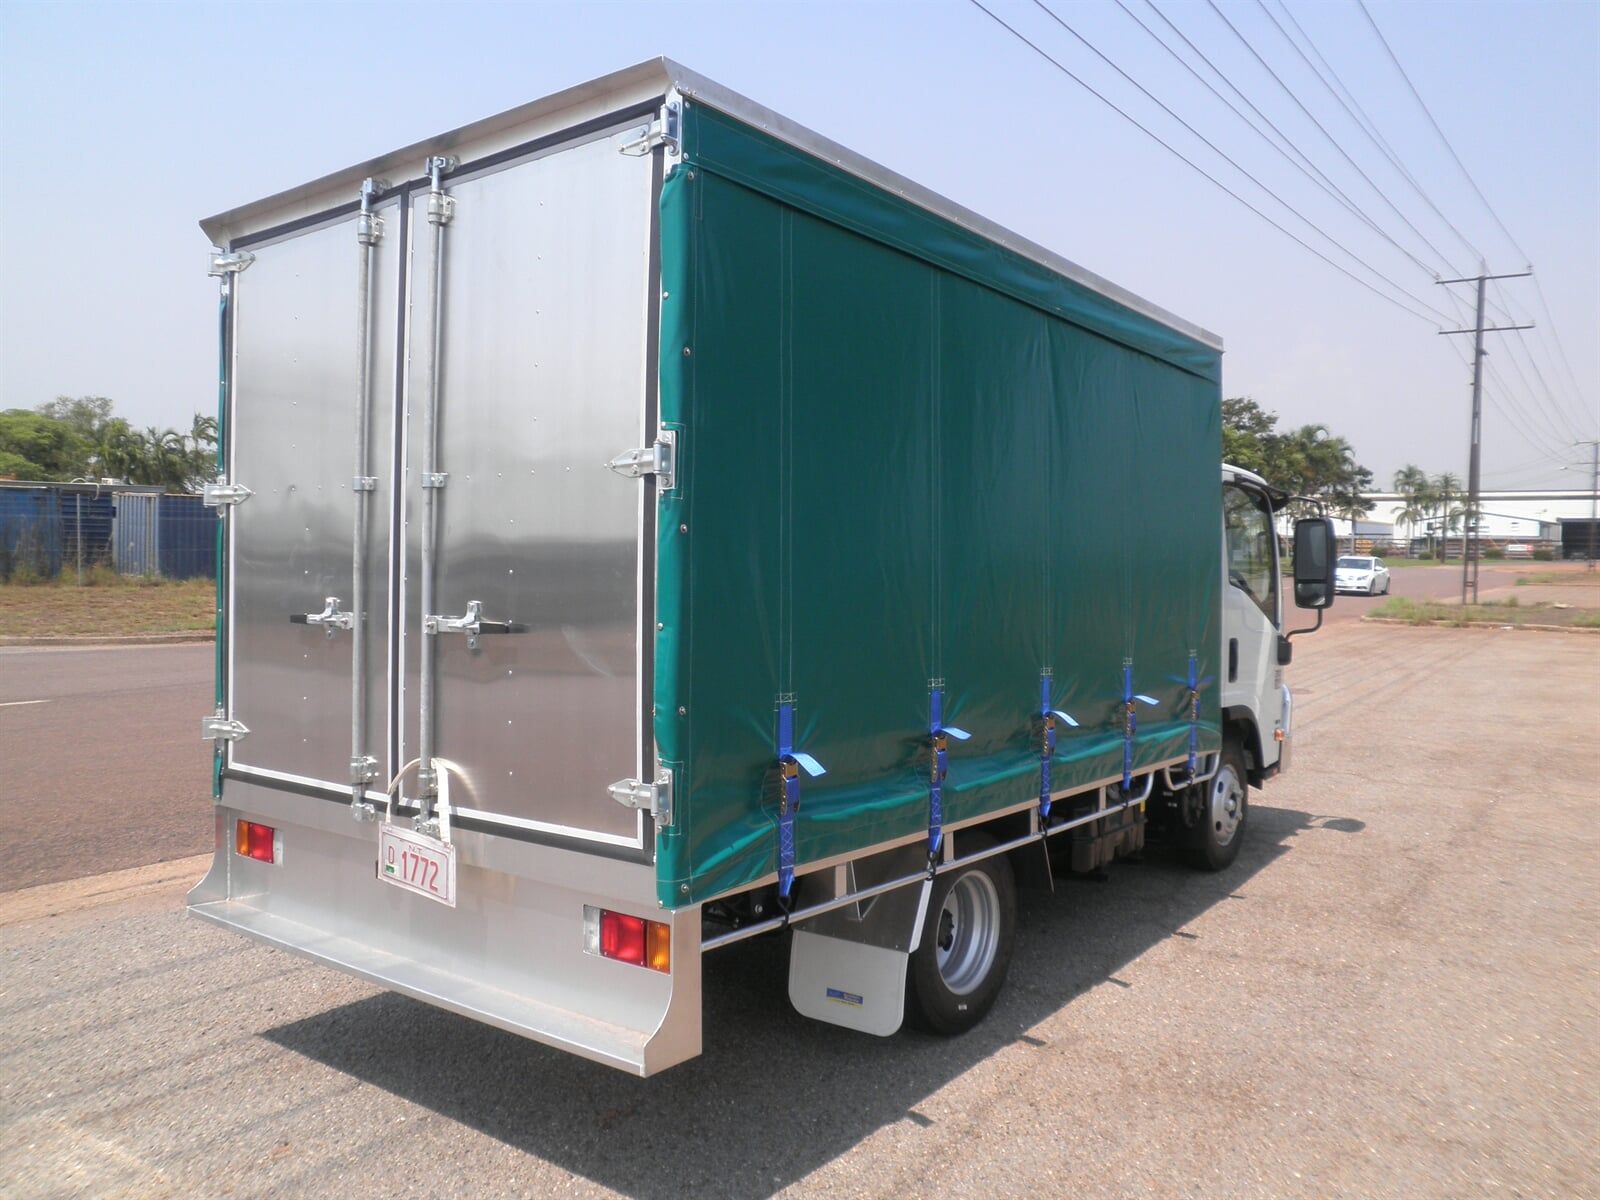 Alloy Pantec rear view — Allycraft Modifications Aluminum Welding Fabrication Canopy in Winellie, NT